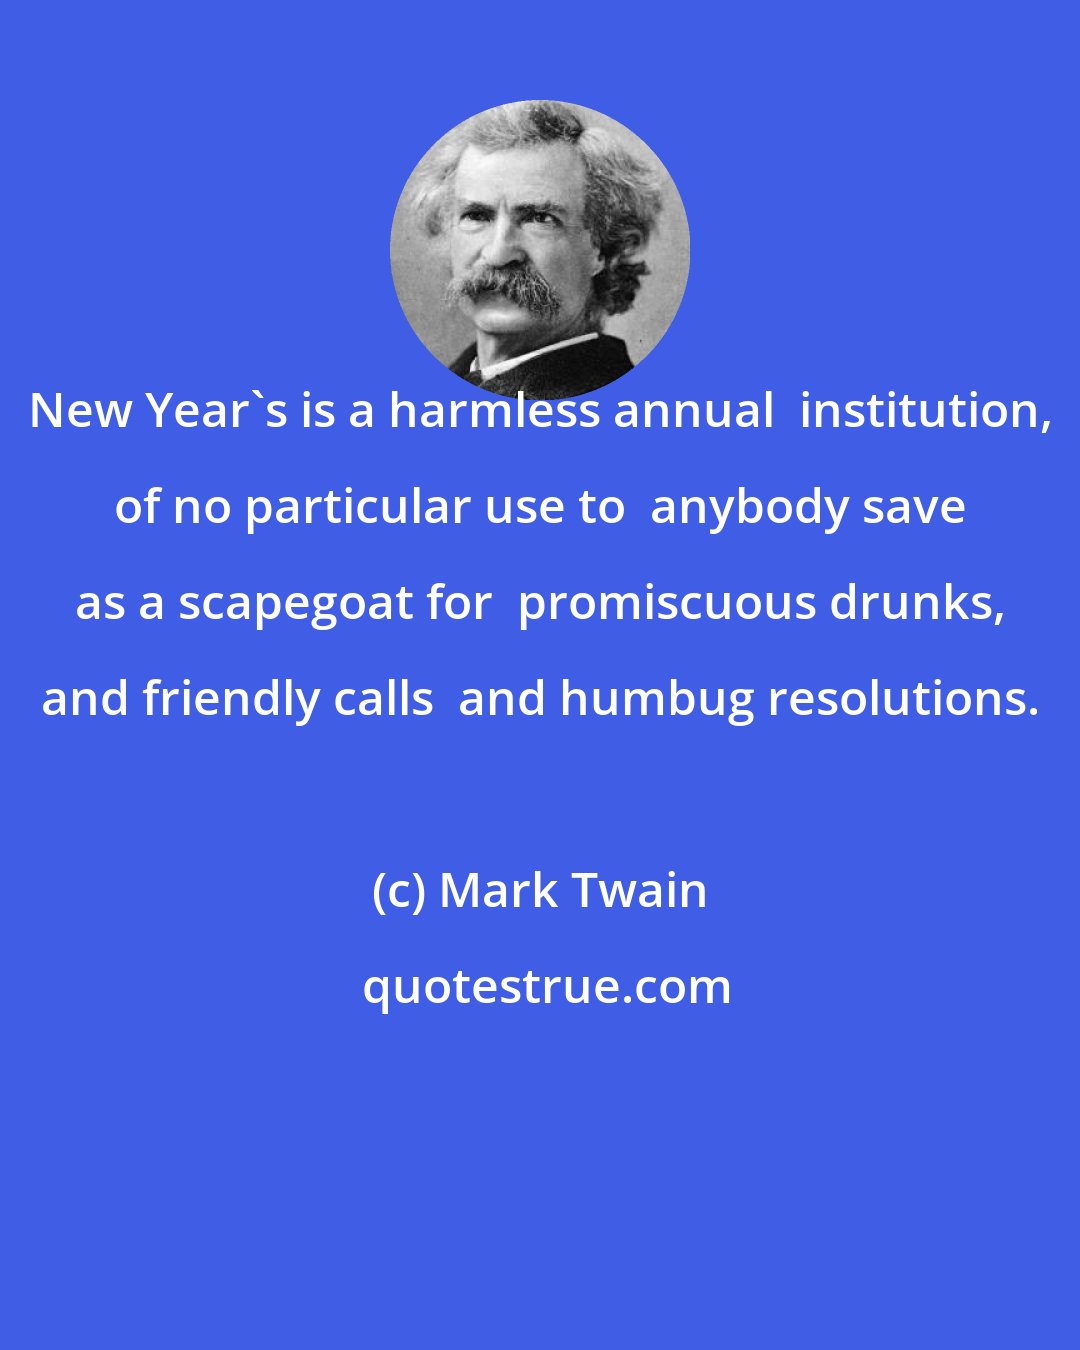 Mark Twain: New Year's is a harmless annual  institution, of no particular use to  anybody save as a scapegoat for  promiscuous drunks, and friendly calls  and humbug resolutions.